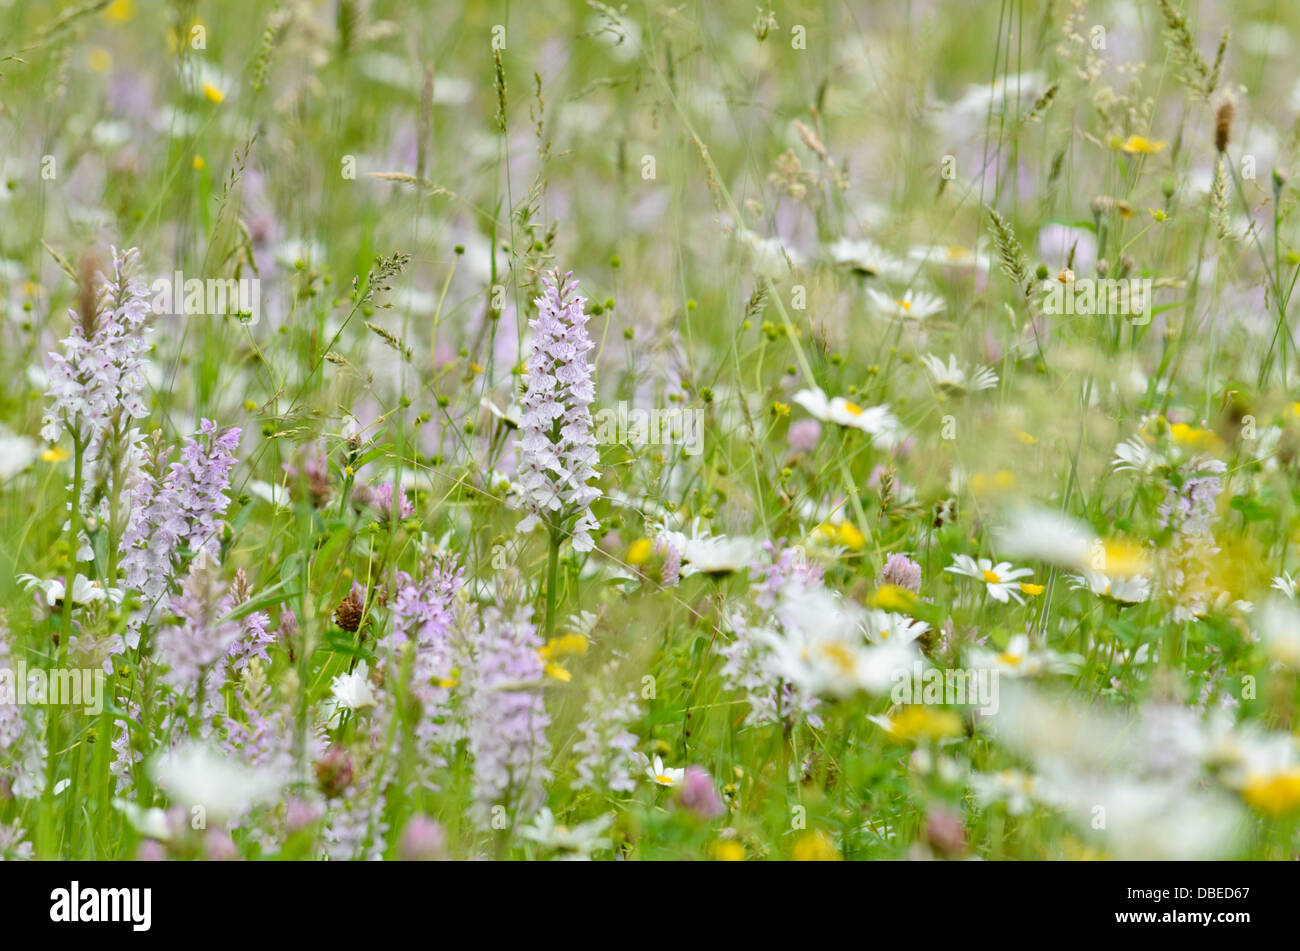 Heath spotted orchid (dactylorhiza maculata) Banque D'Images